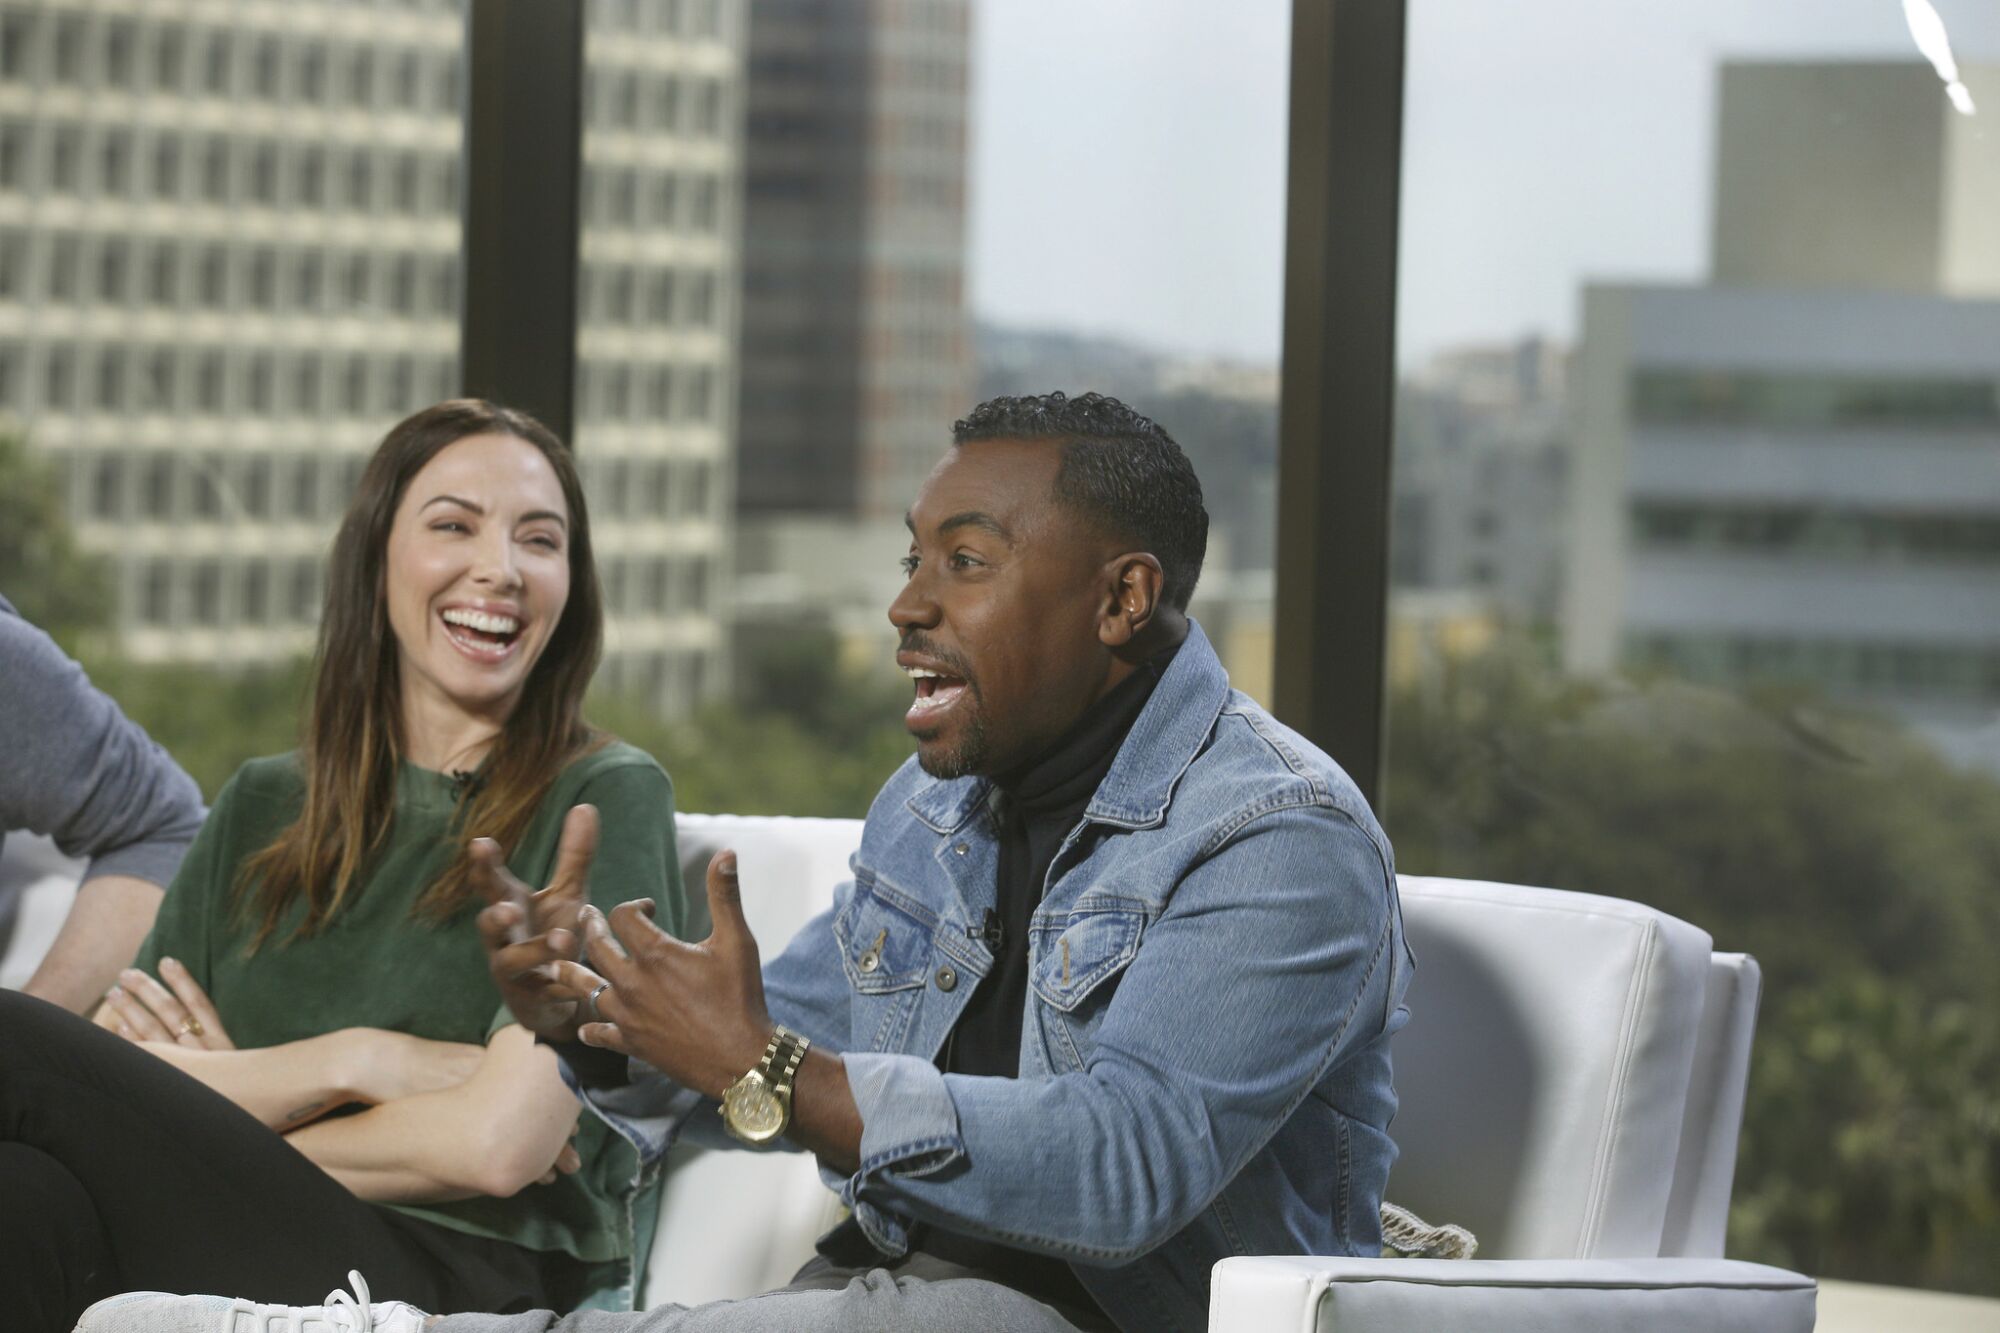 The Envelope's 2018 Emmy Roundtable with TV showrunners: Prentice Penny (“Insecure”) and Whitney Cummings (“Roseanne”).